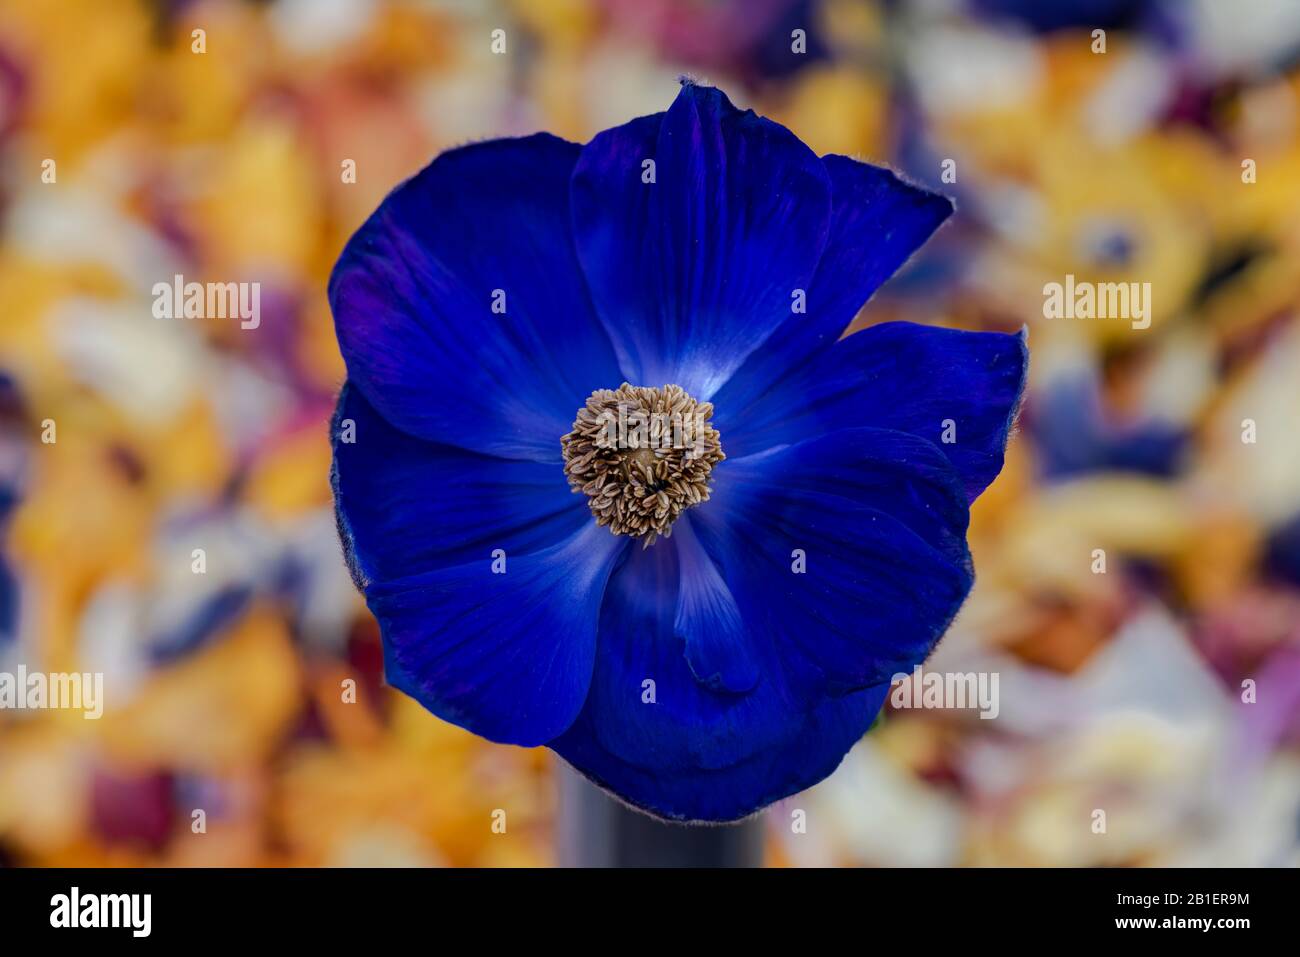 Isolated single deep blue anemone blossom macro on colorful blurred petals background Stock Photo